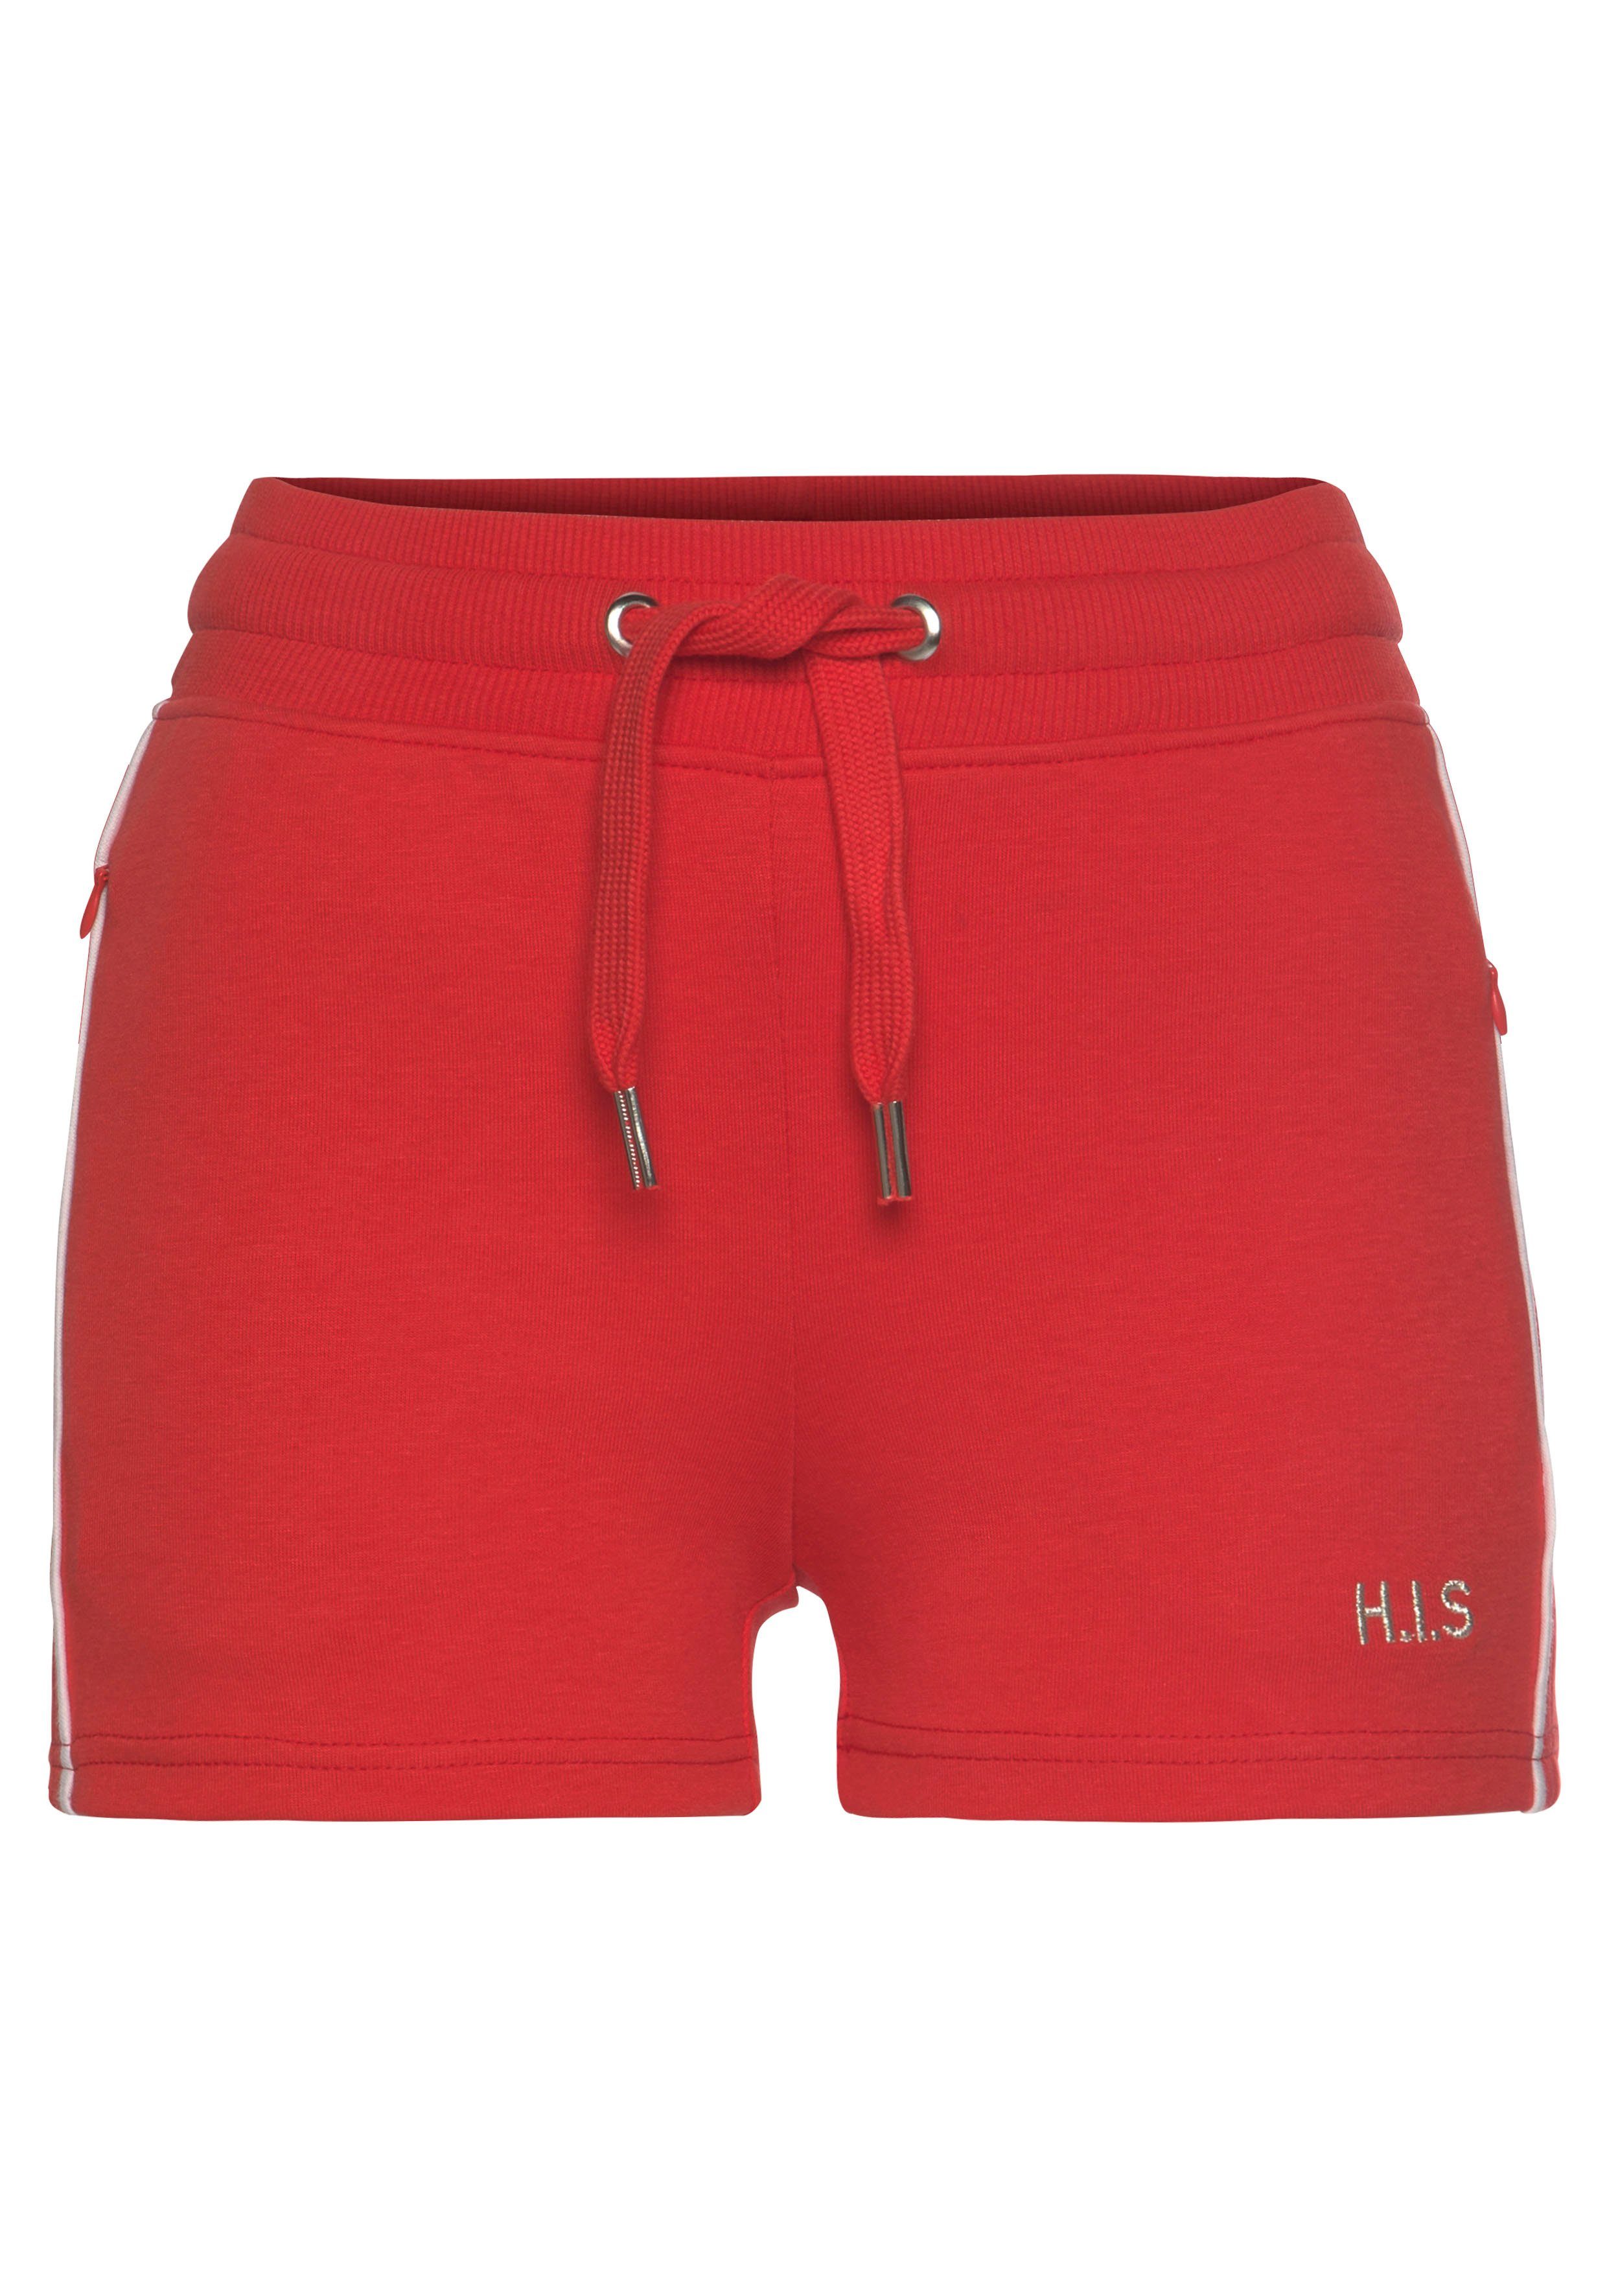 H.I.S der mit an Shorts Piping rot Seite